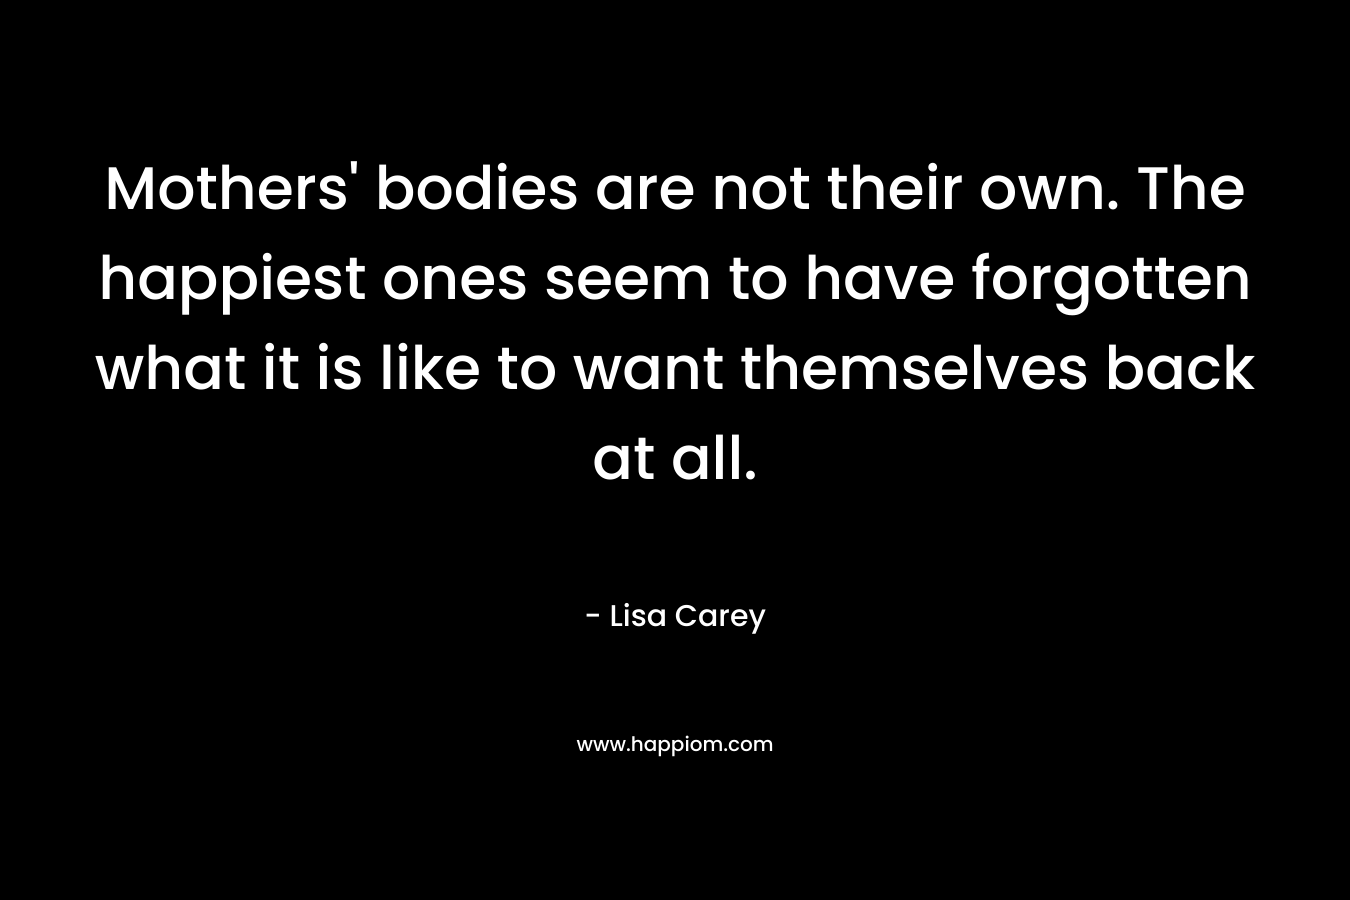 Mothers’ bodies are not their own. The happiest ones seem to have forgotten what it is like to want themselves back at all. – Lisa Carey